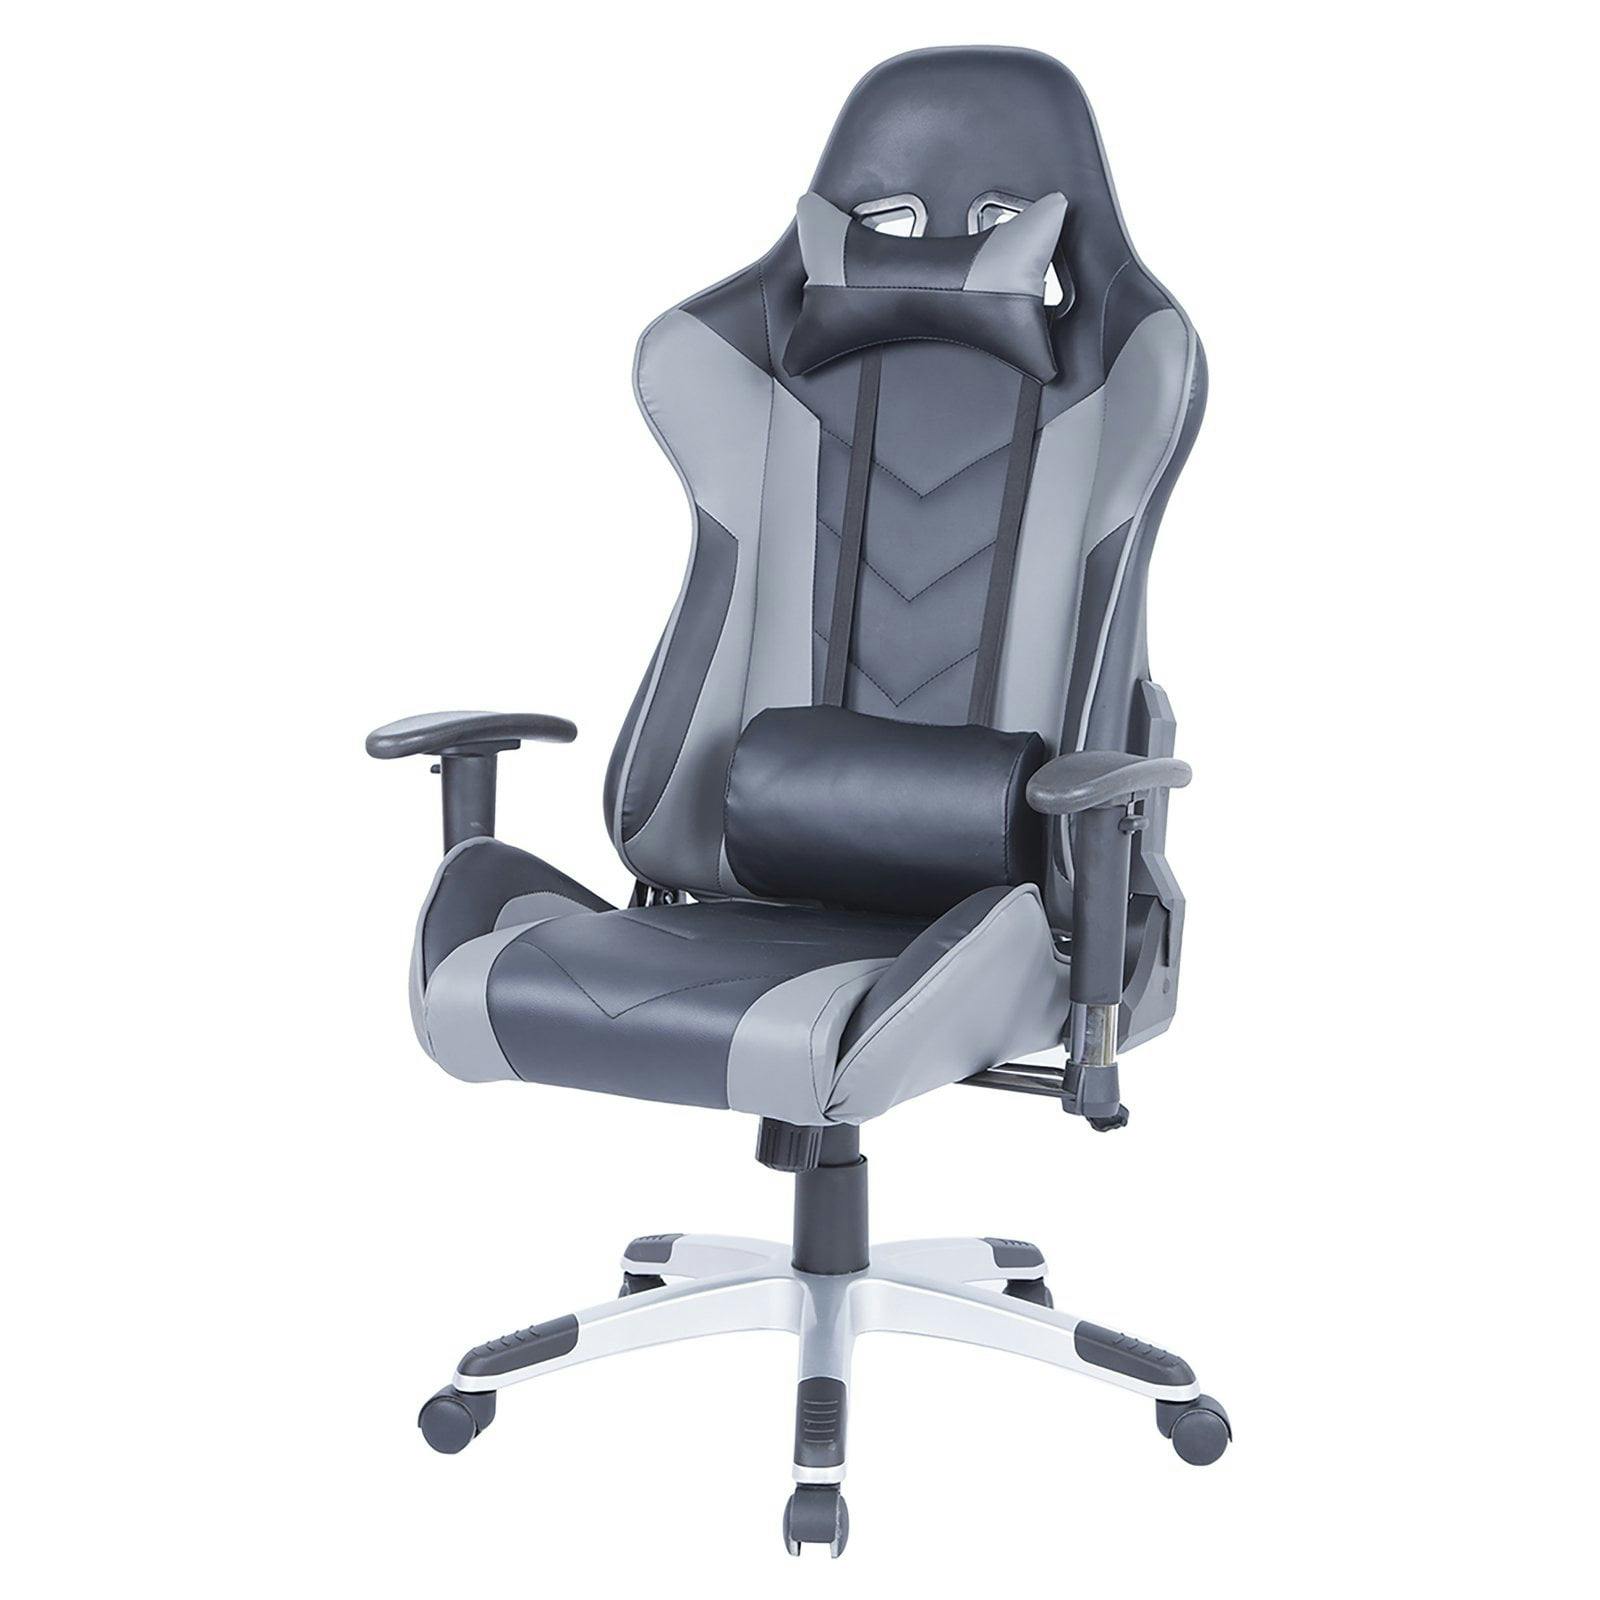 ErgoFlex Black Leather Swivel Office Chair with Adjustable Arms